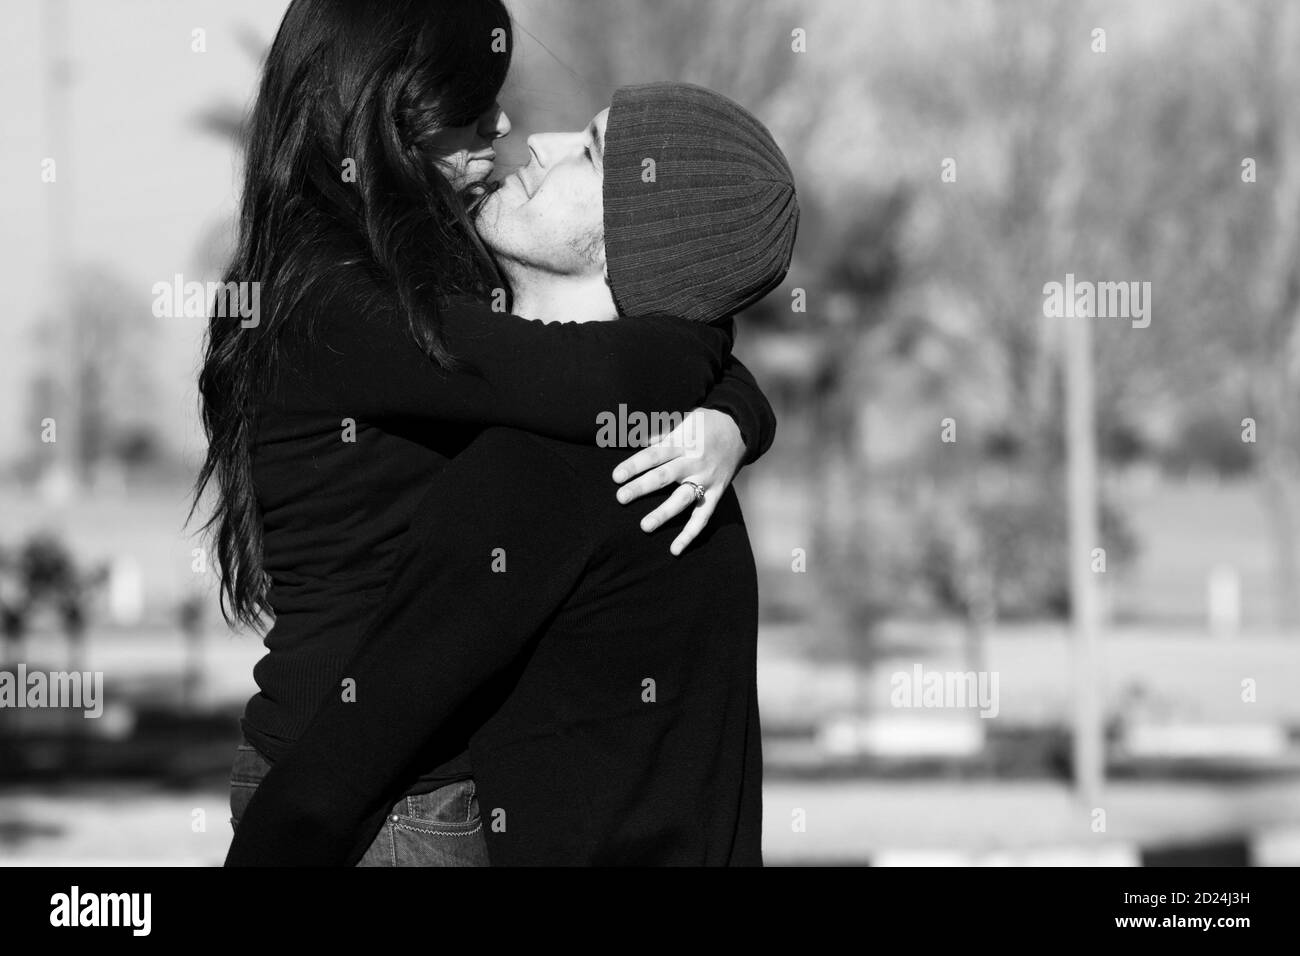 A couple embrace on a sunny winter day Stock Photo